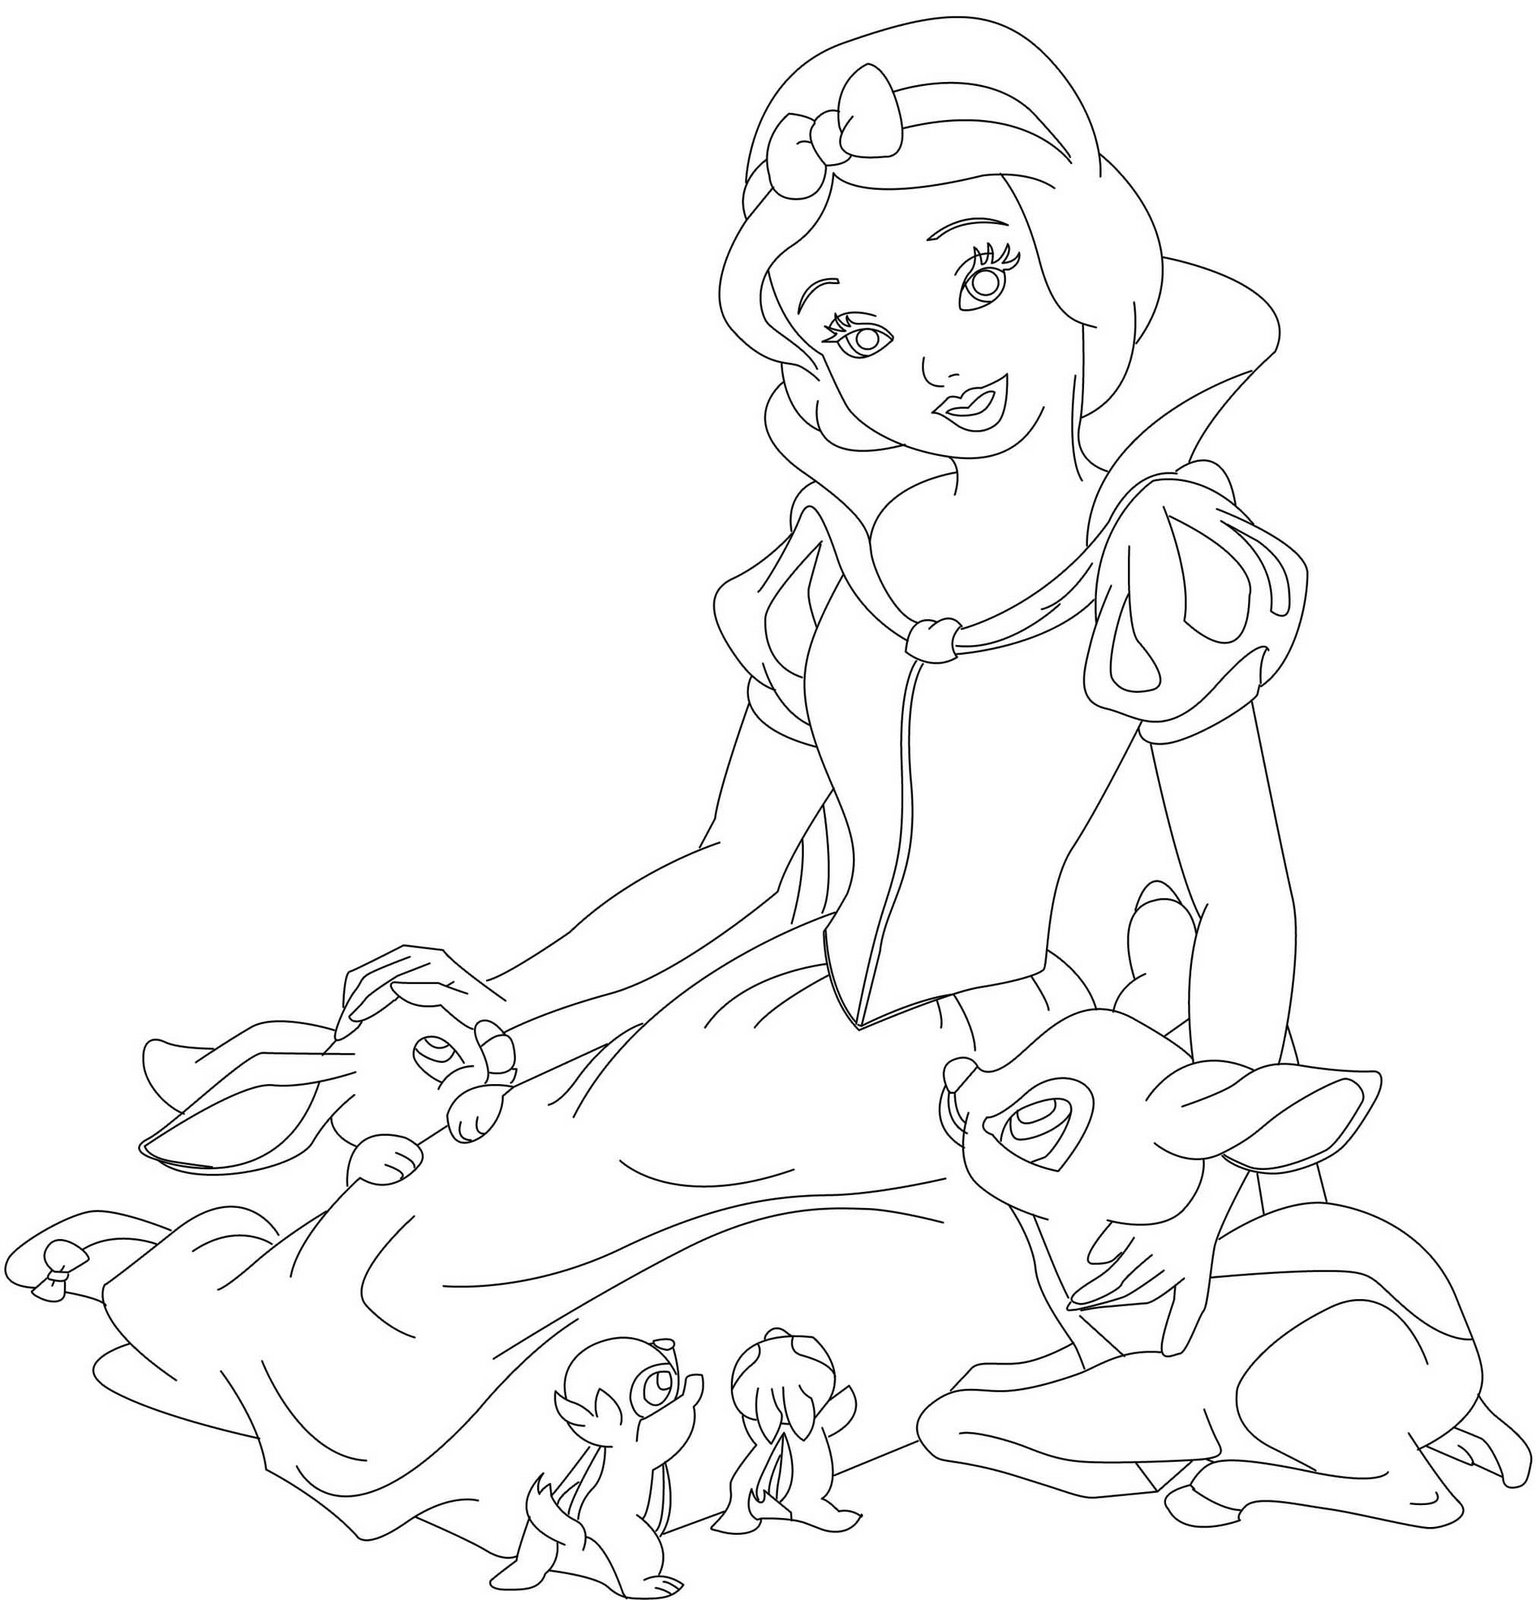 [princess-coloring-pages-snow-white-07.jpg]